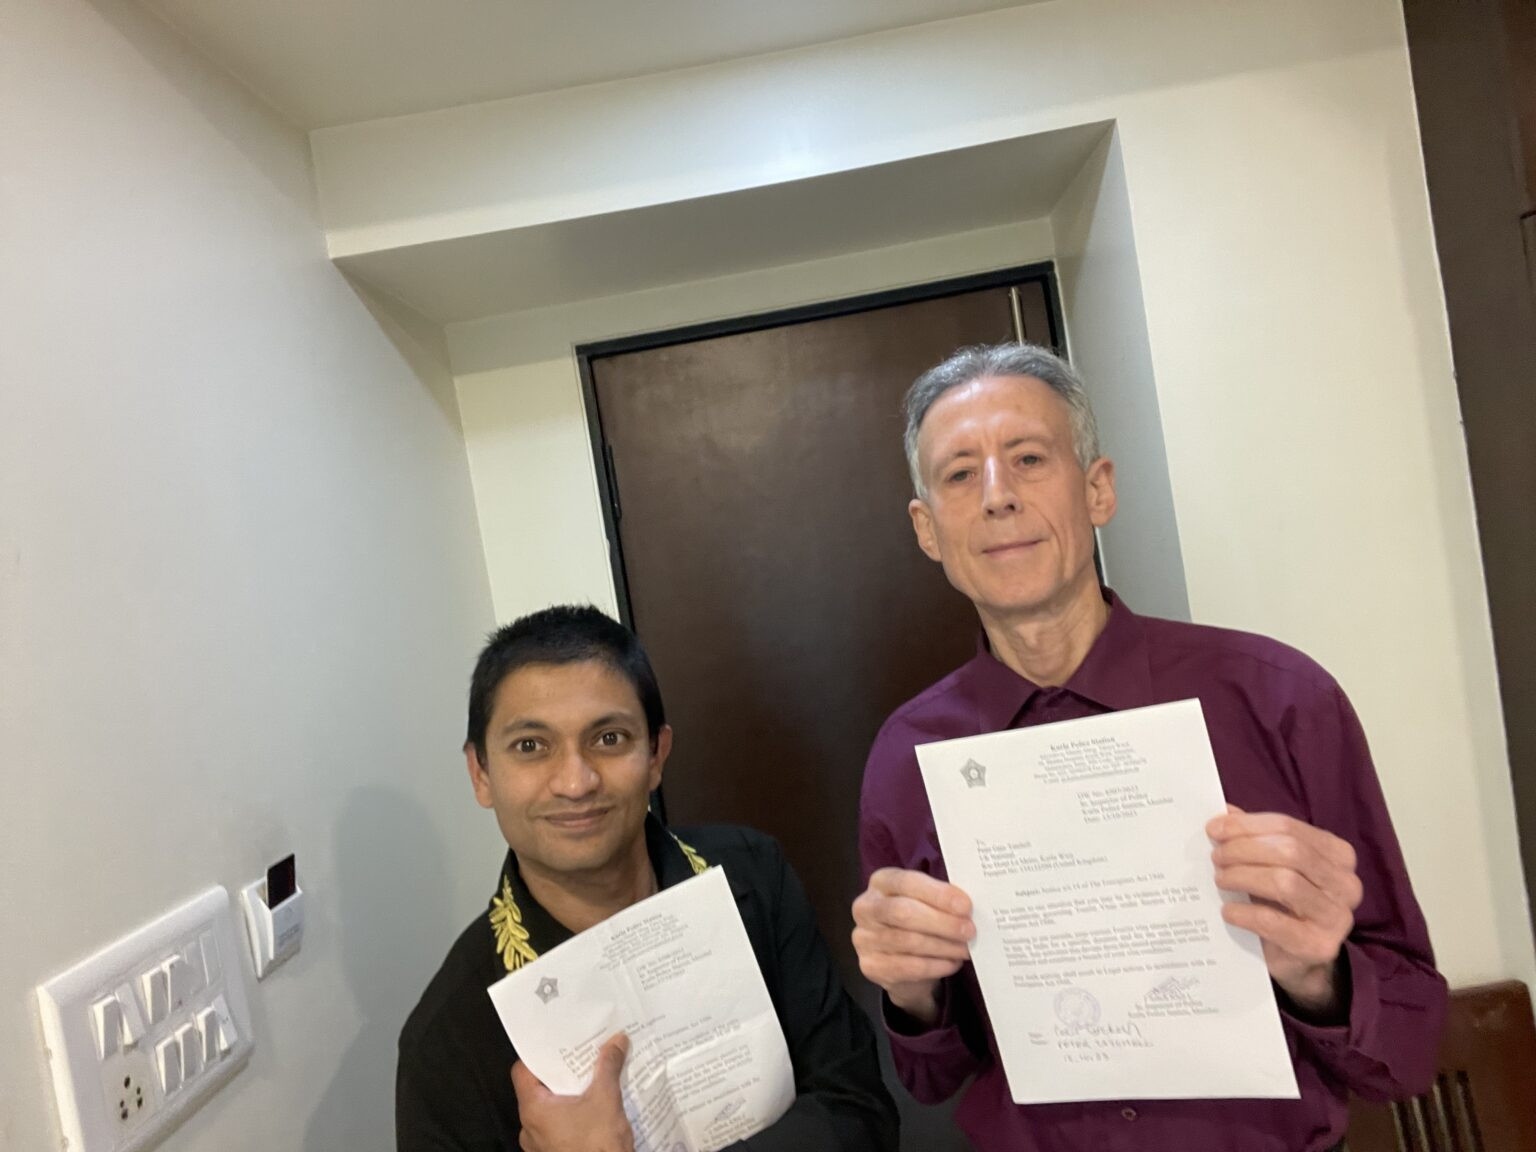 Tatchell claims he cannot leave Mumbai hotel after planning protest at IOC Session